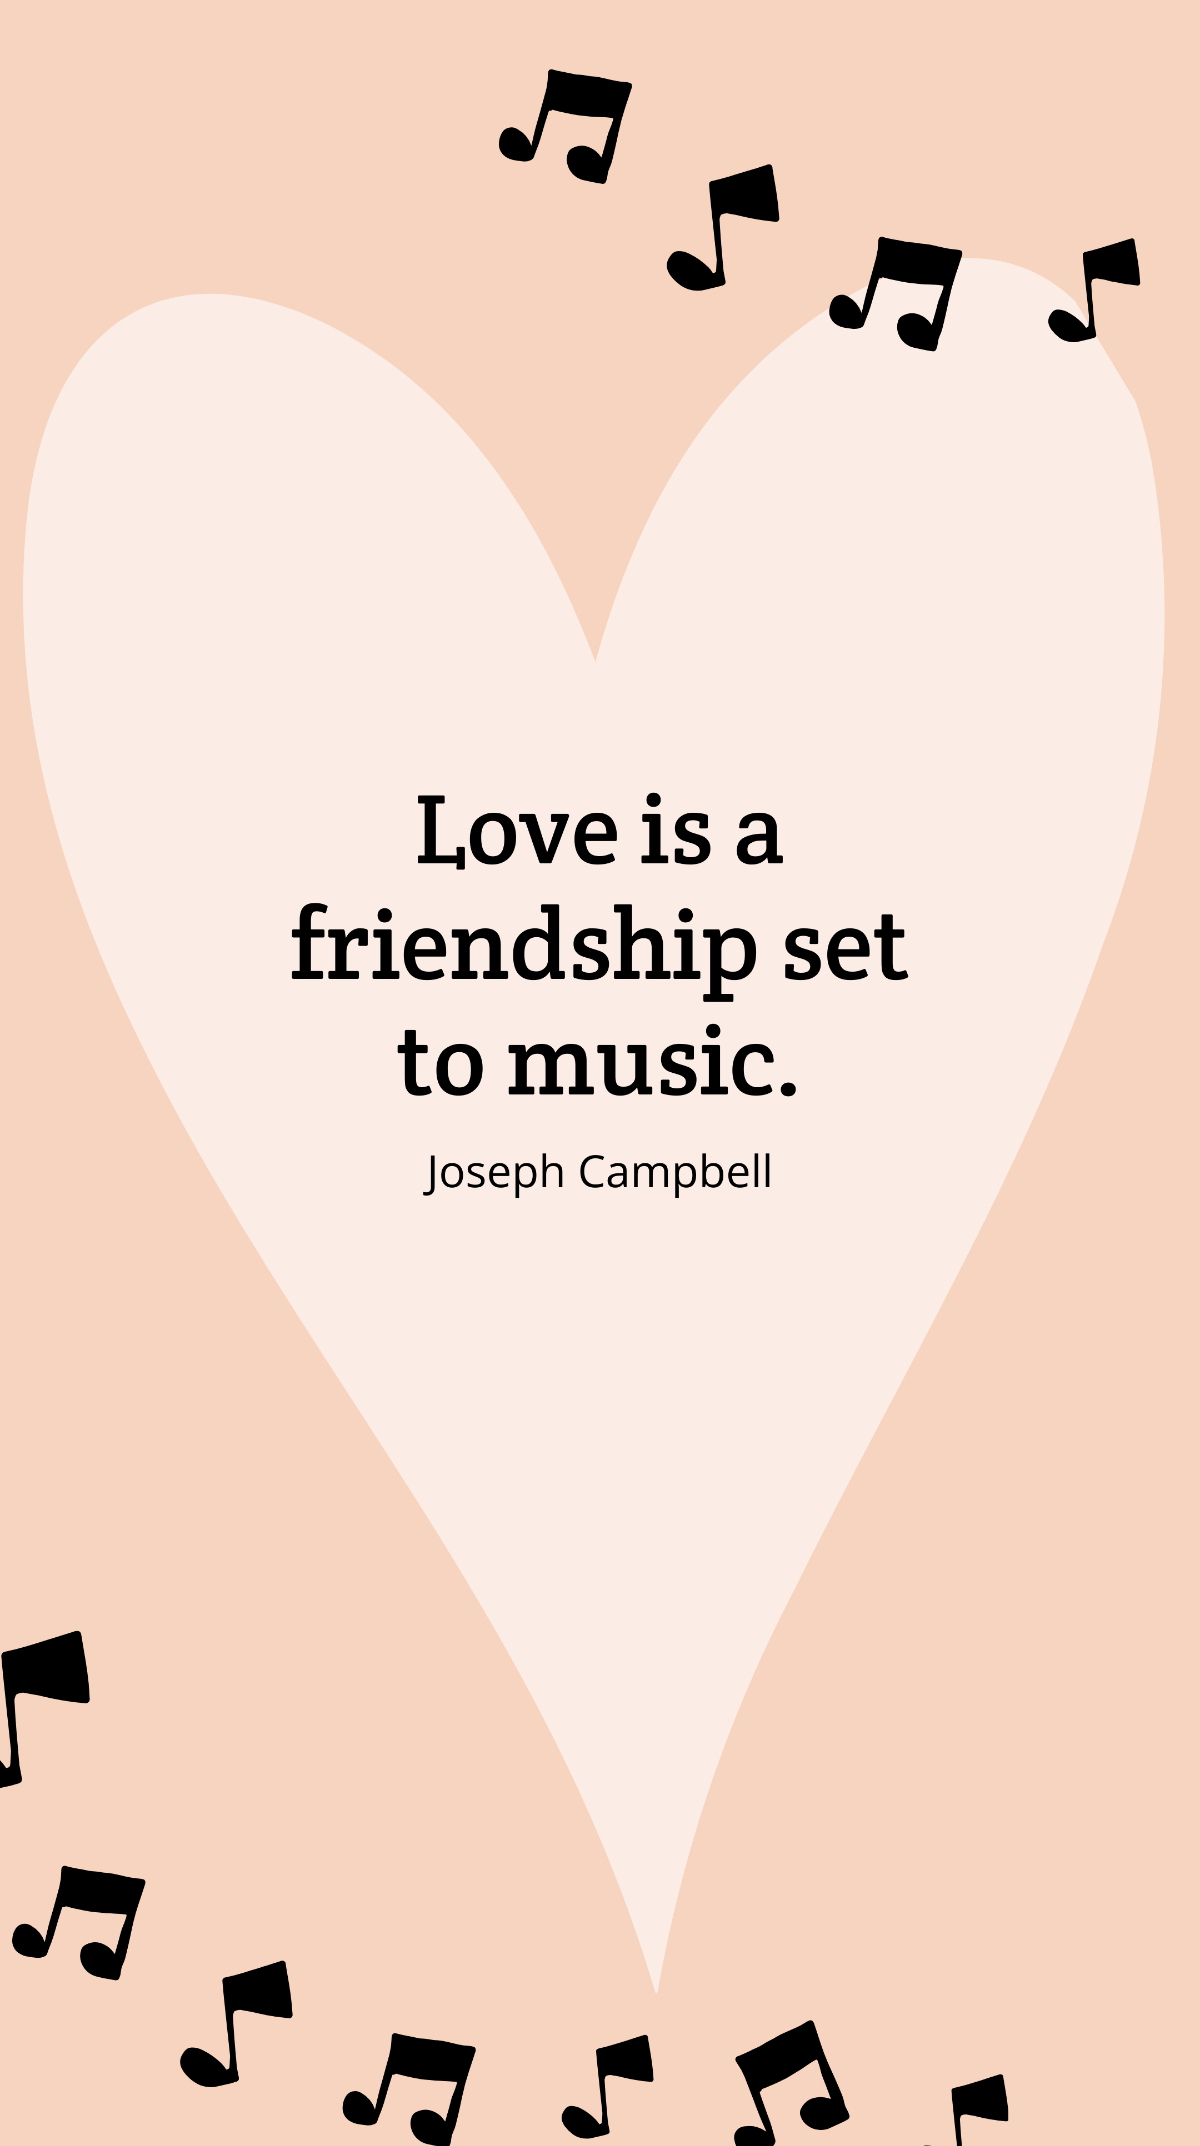 Joseph Campbell - “Love is a friendship set to music.” Template